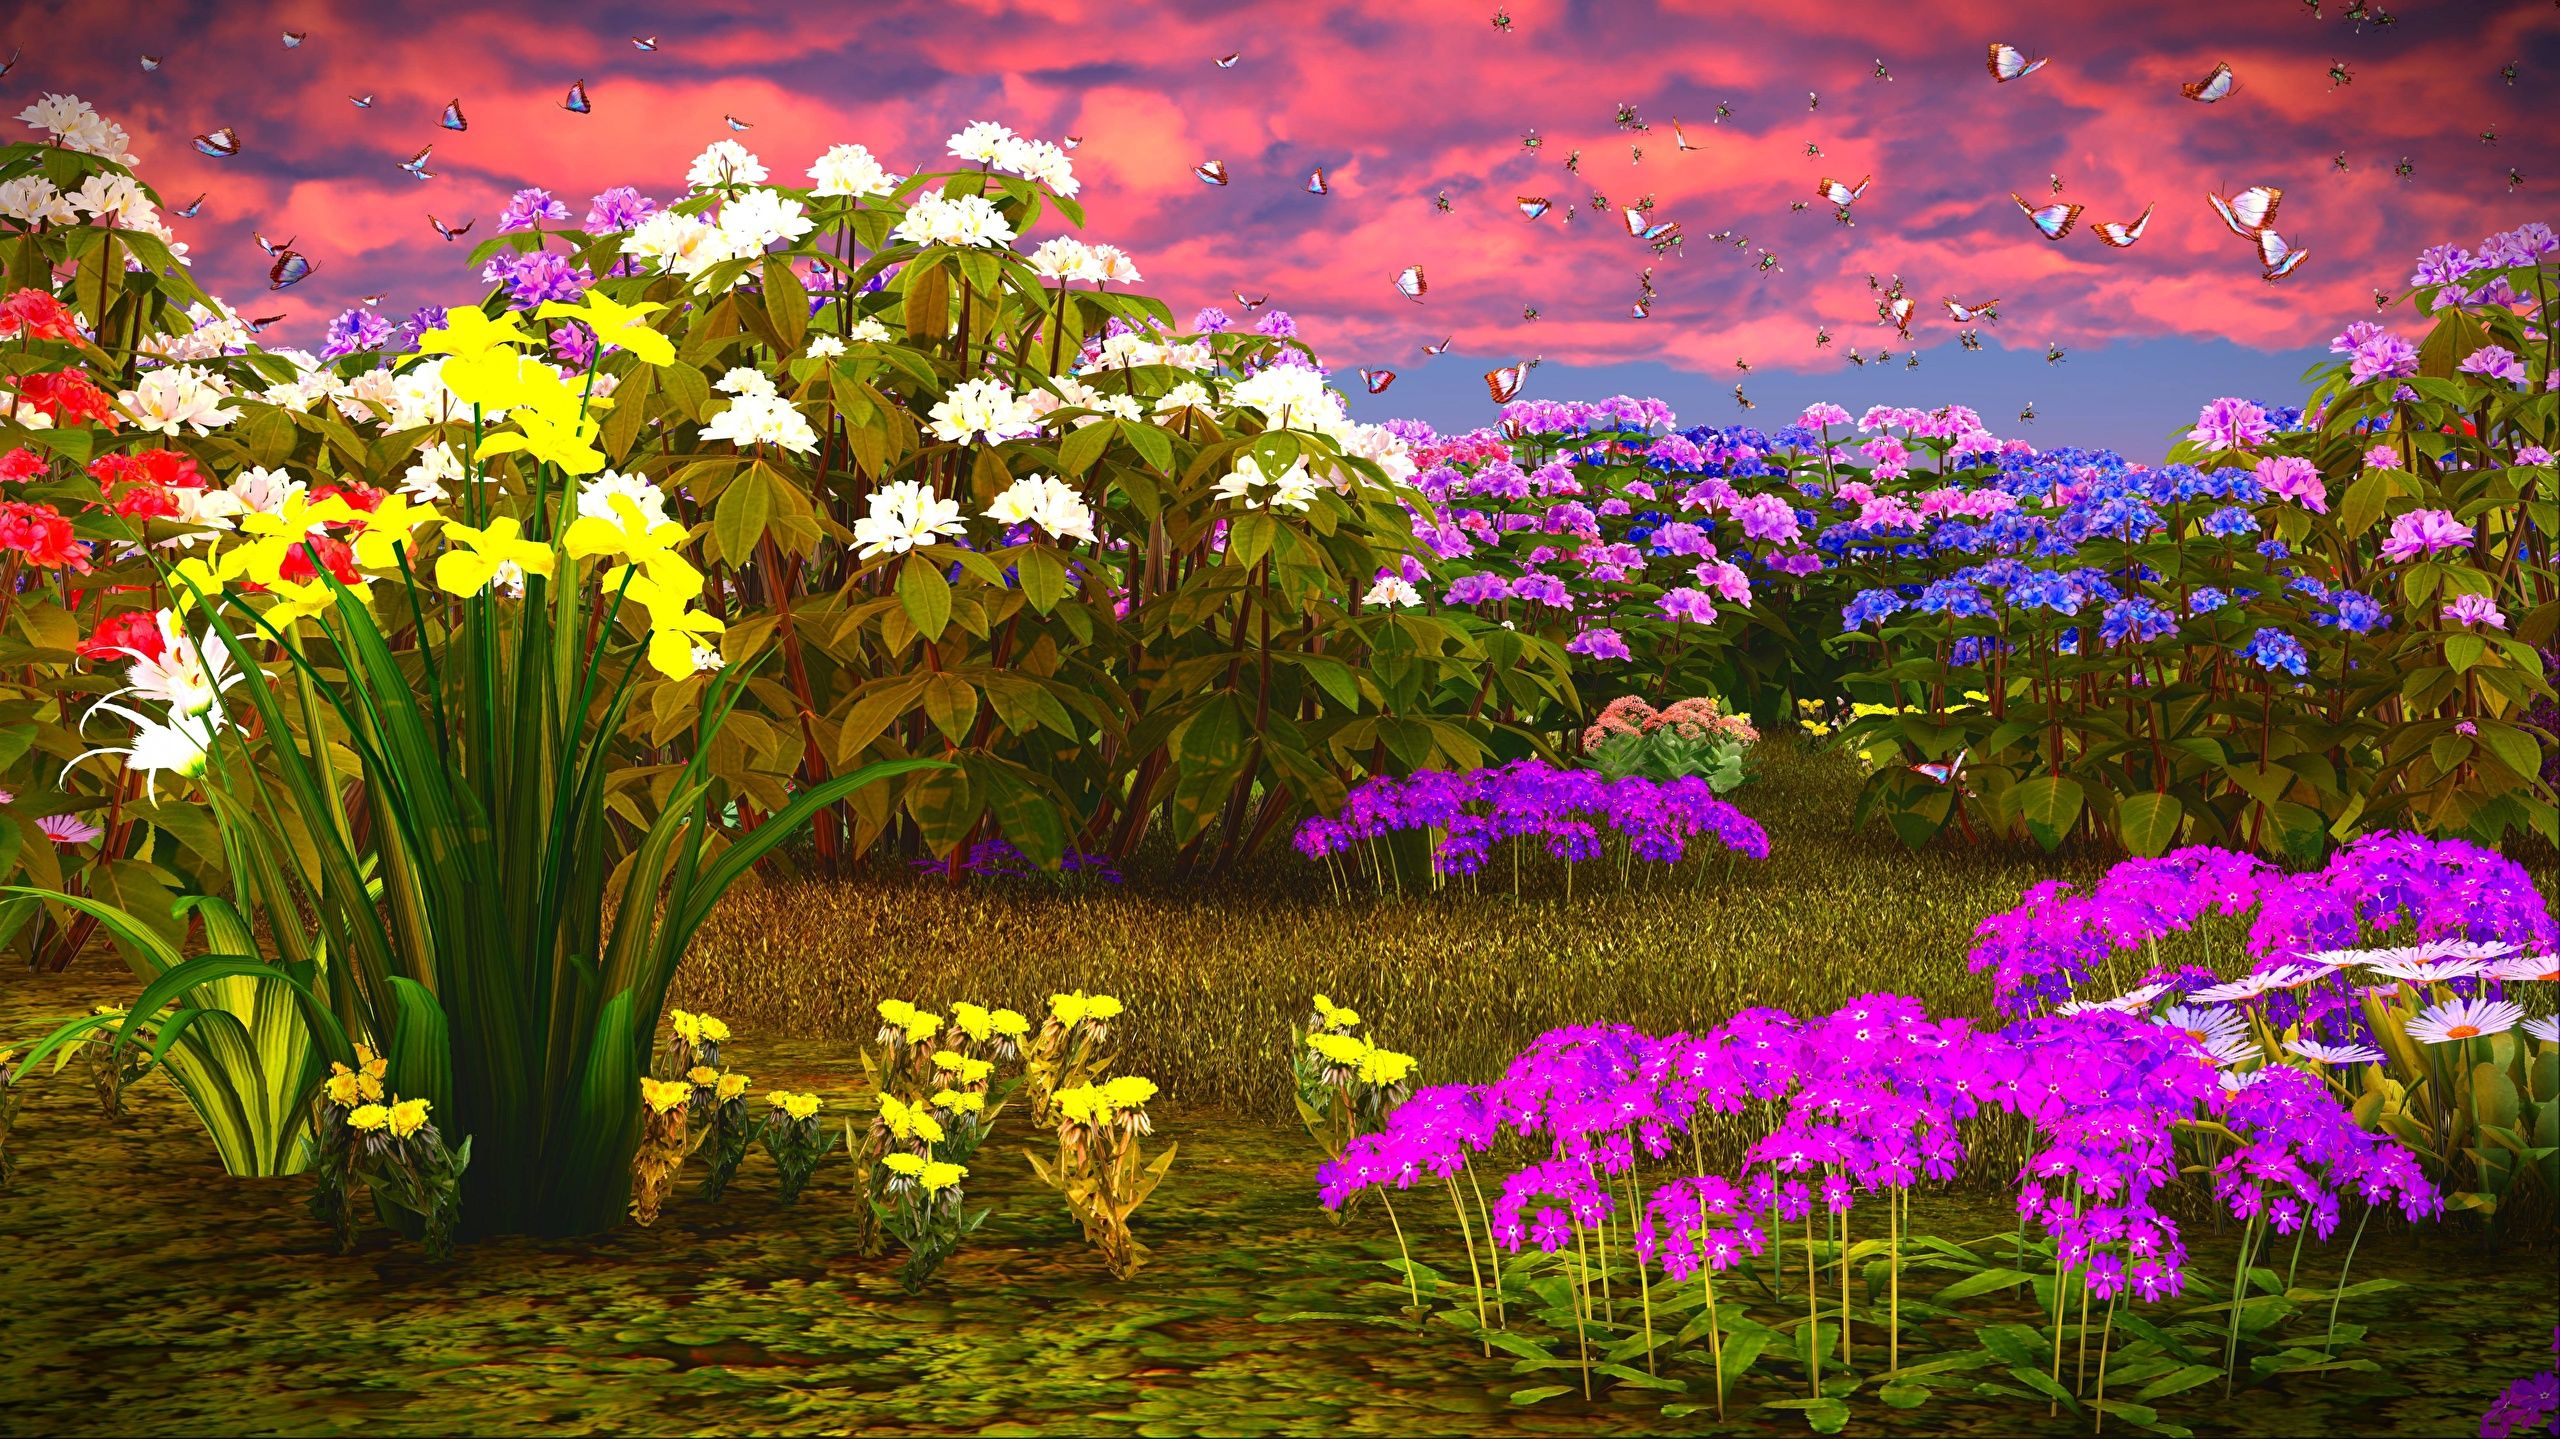 Wallpaper butterfly 3D Graphics Phlox Flowers Daffodils 2560x1440